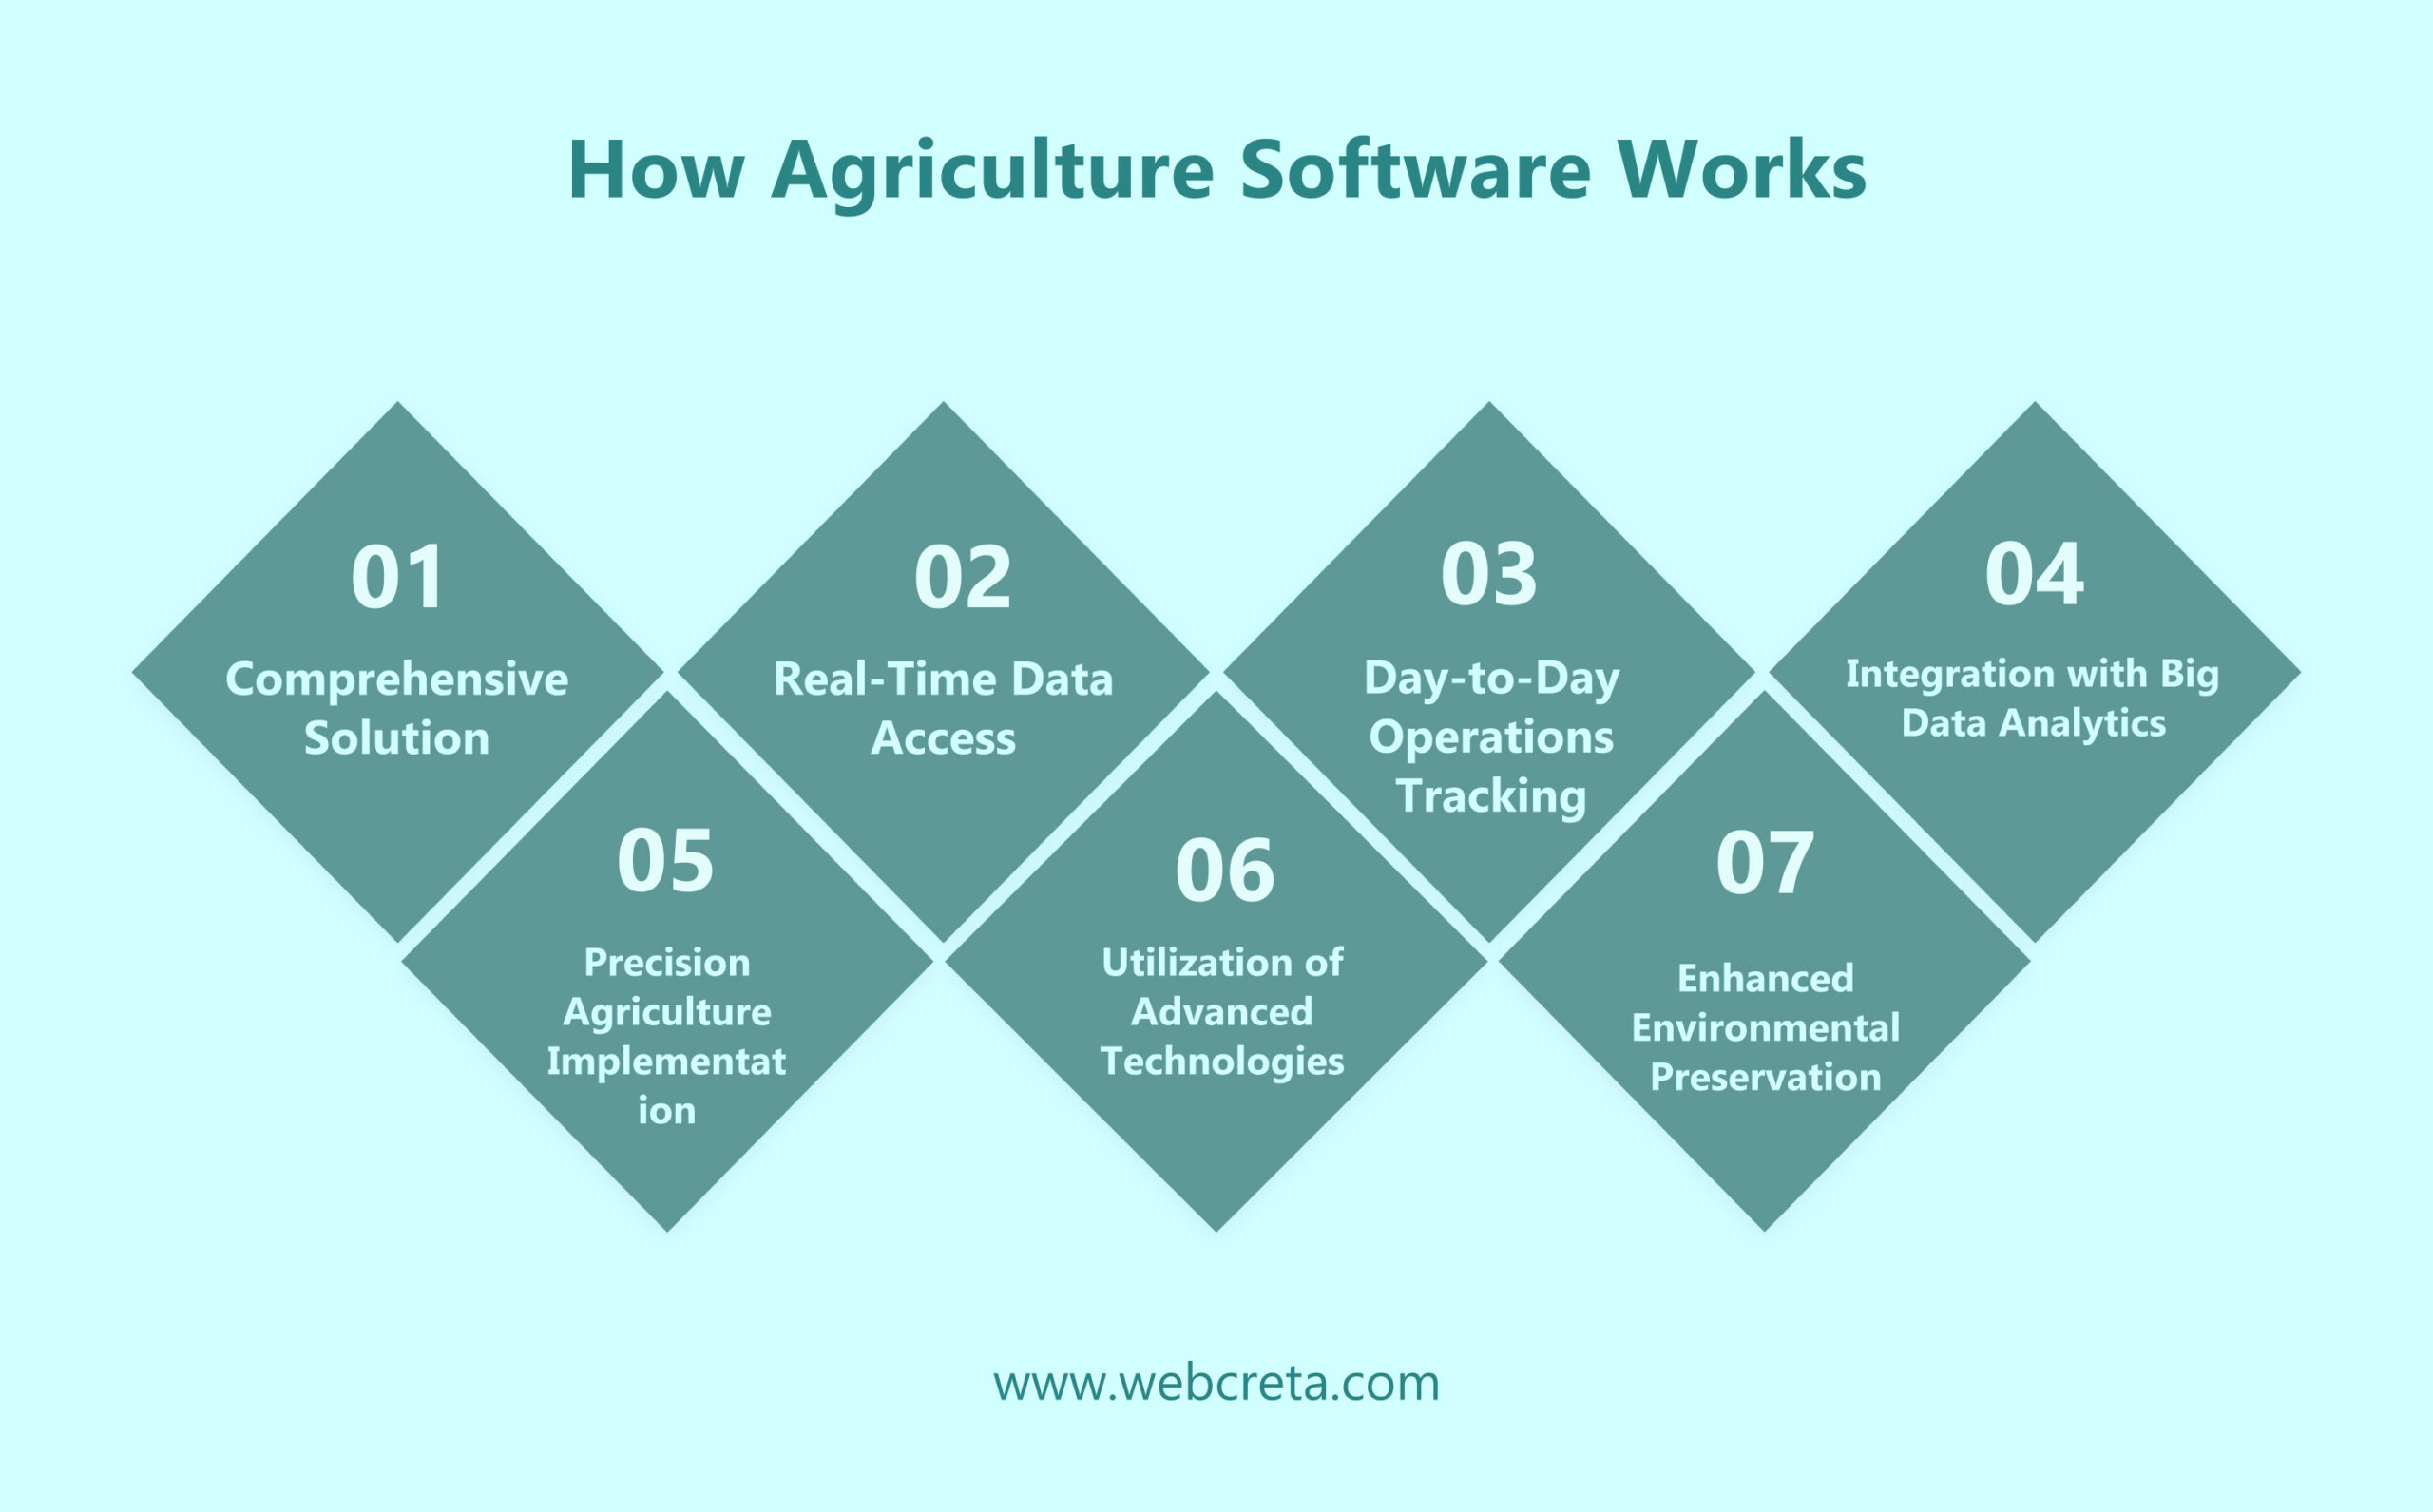 How Agriculture Software Works